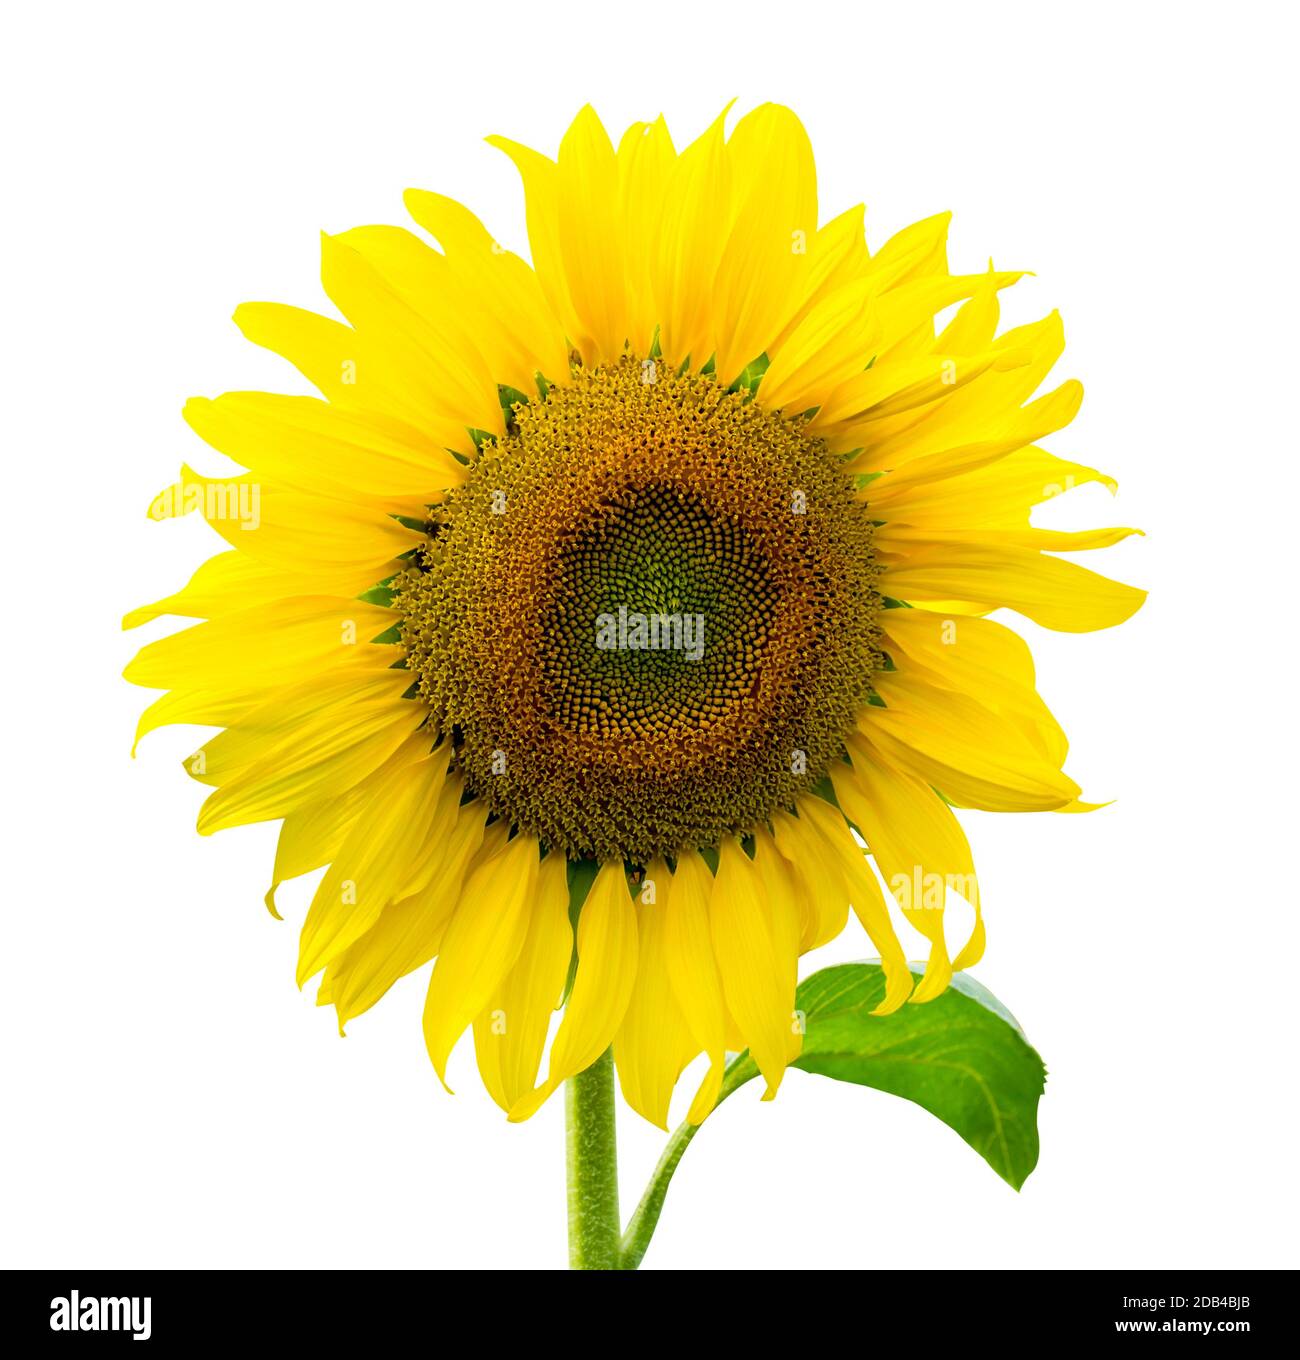 Sunflower isolated on white background with clipping path Stock Photo